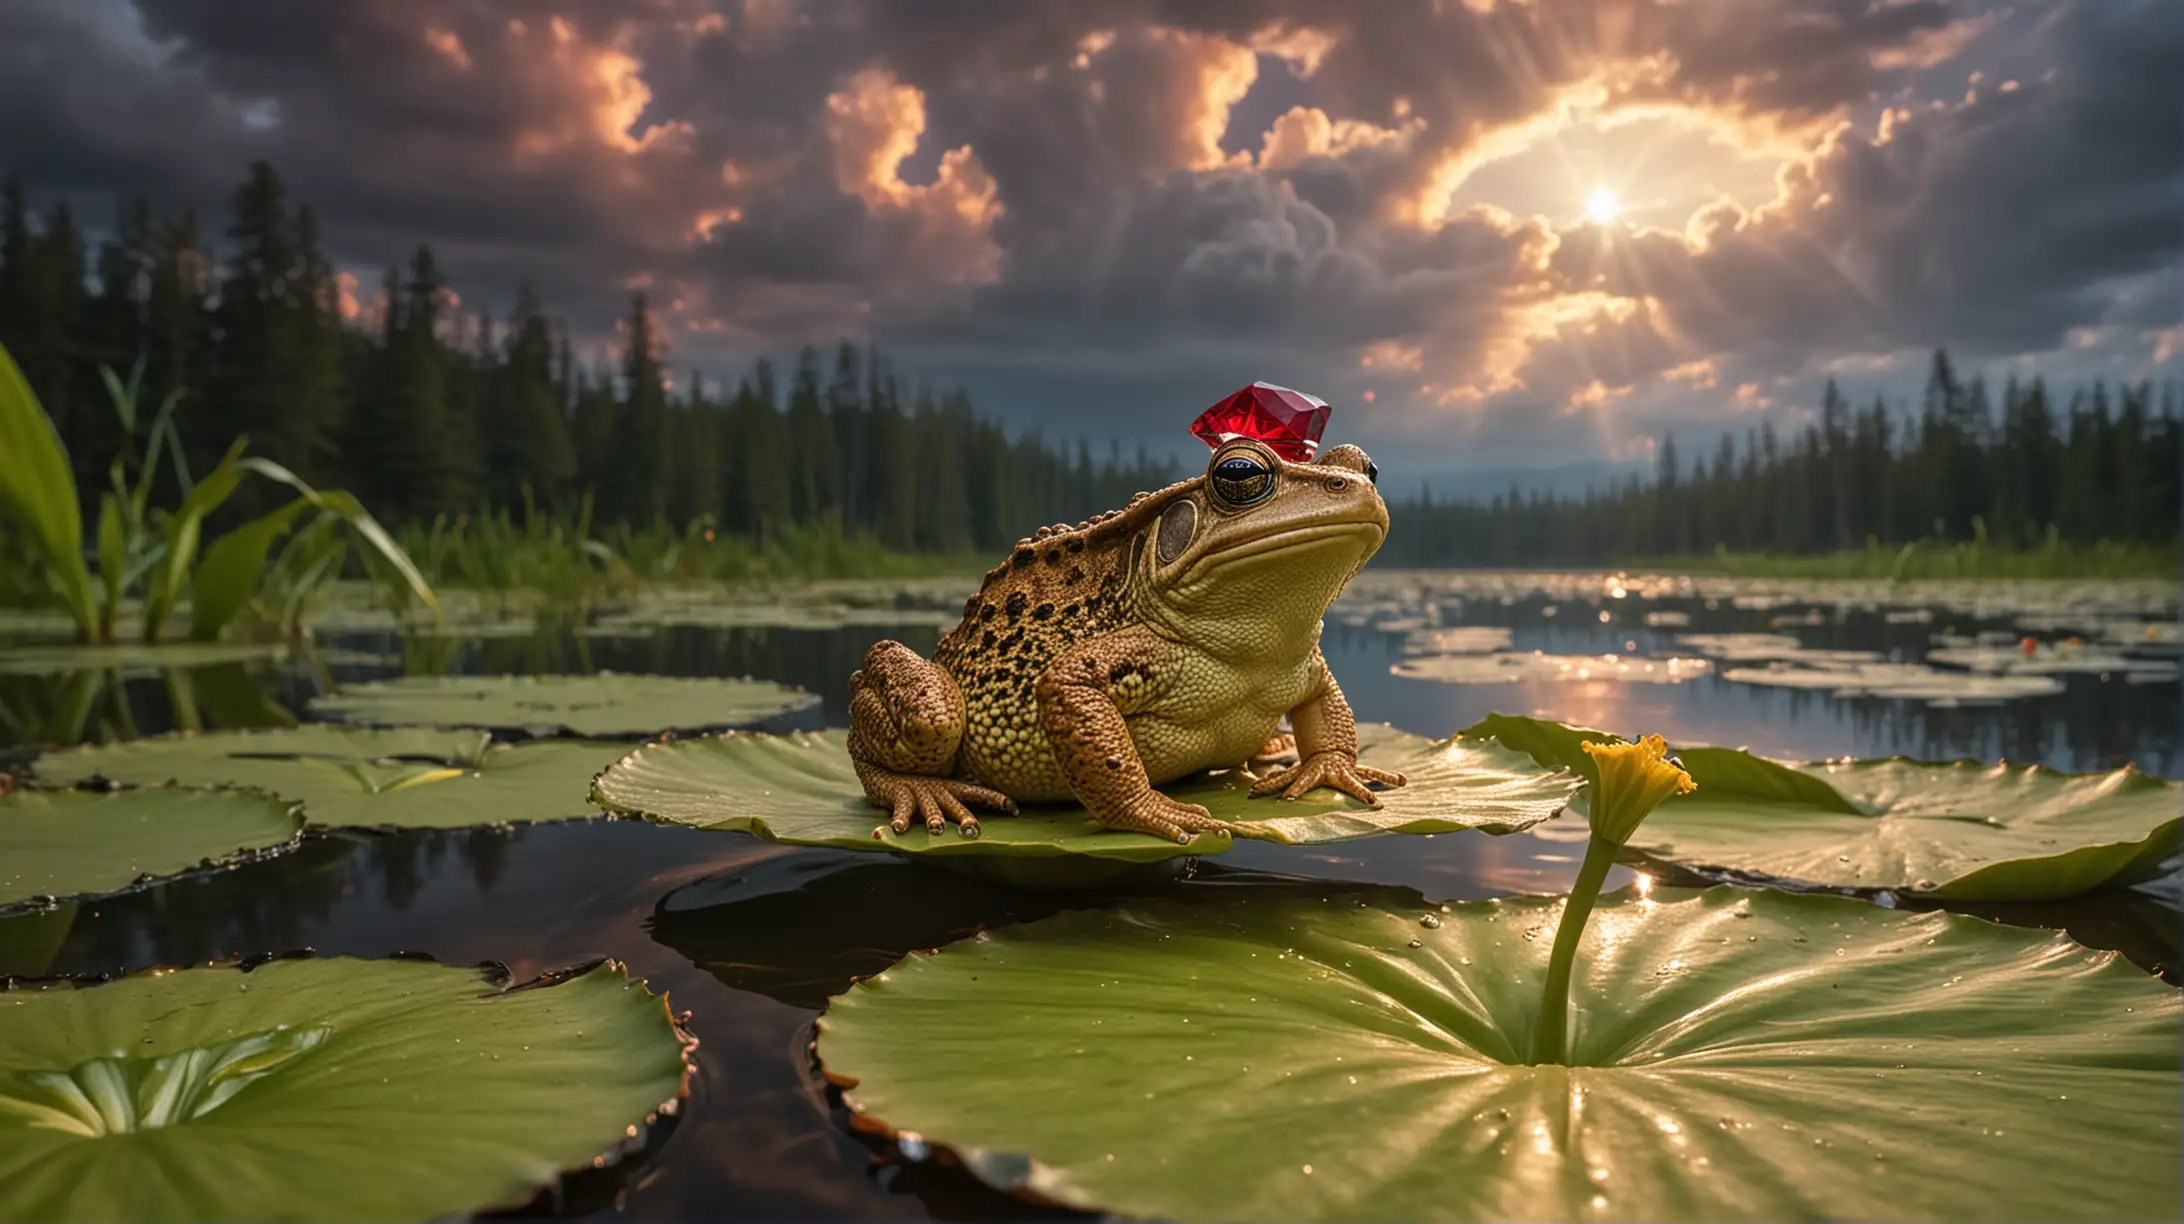 Enchanting Magic Toad on Sparkling Lily Pad Amidst Forest with Dramatic Sky